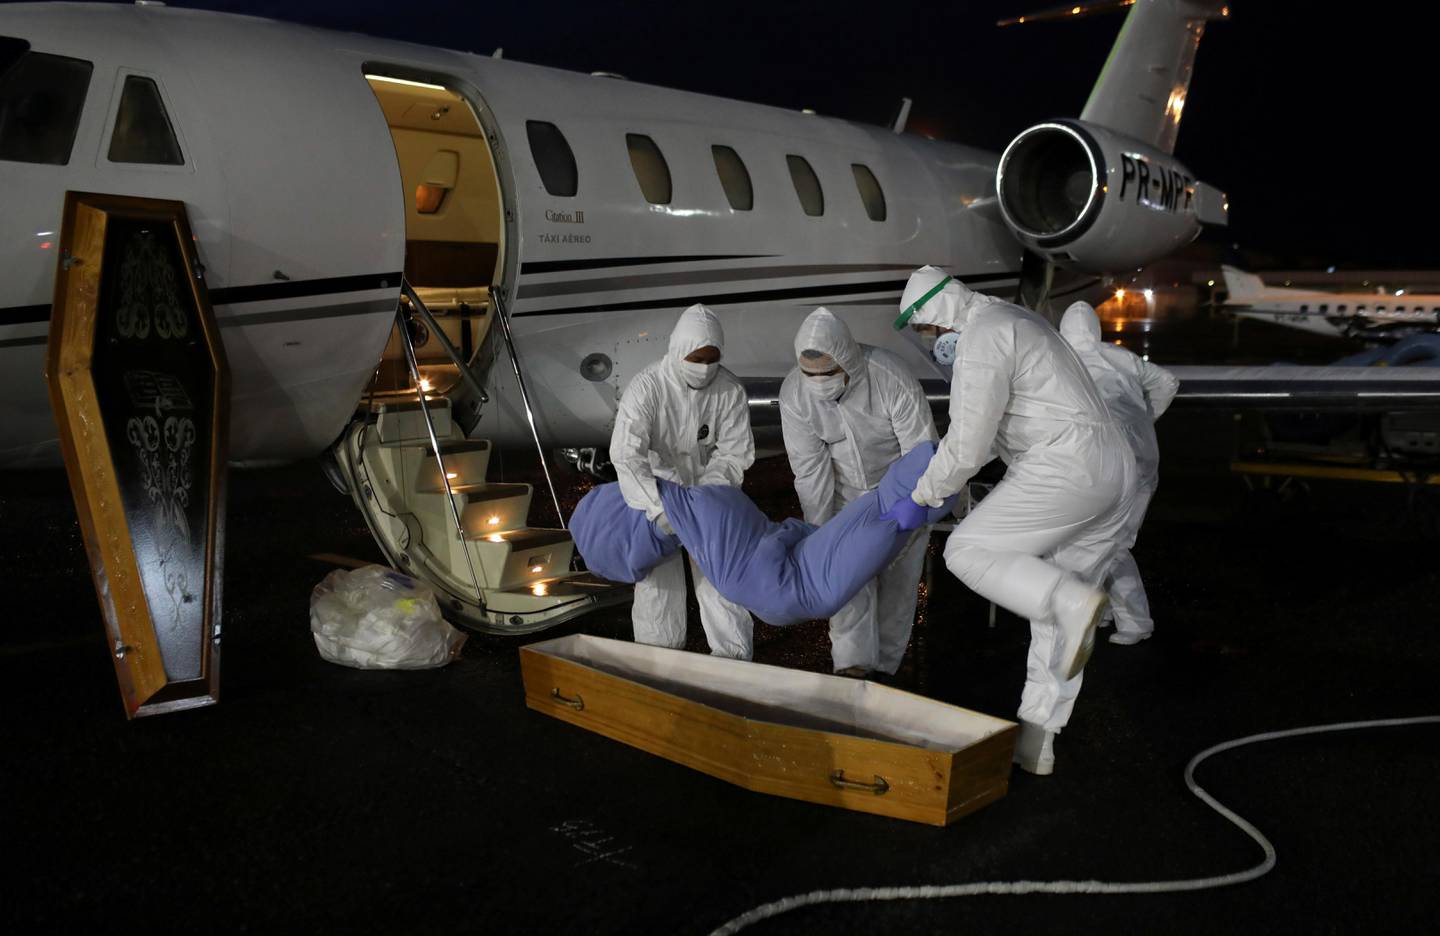 Healthcare workers on protective clothing carry the body of Laureano Ferraz, 78, a Wanano indigenous man who passed away due to the coronavirus disease (COVID-19), after arriving by an ICU jet from Sao Gabriel da Cachoeira to Manaus, Brazil, May 18, 2020. REUTERS/Bruno Kelly